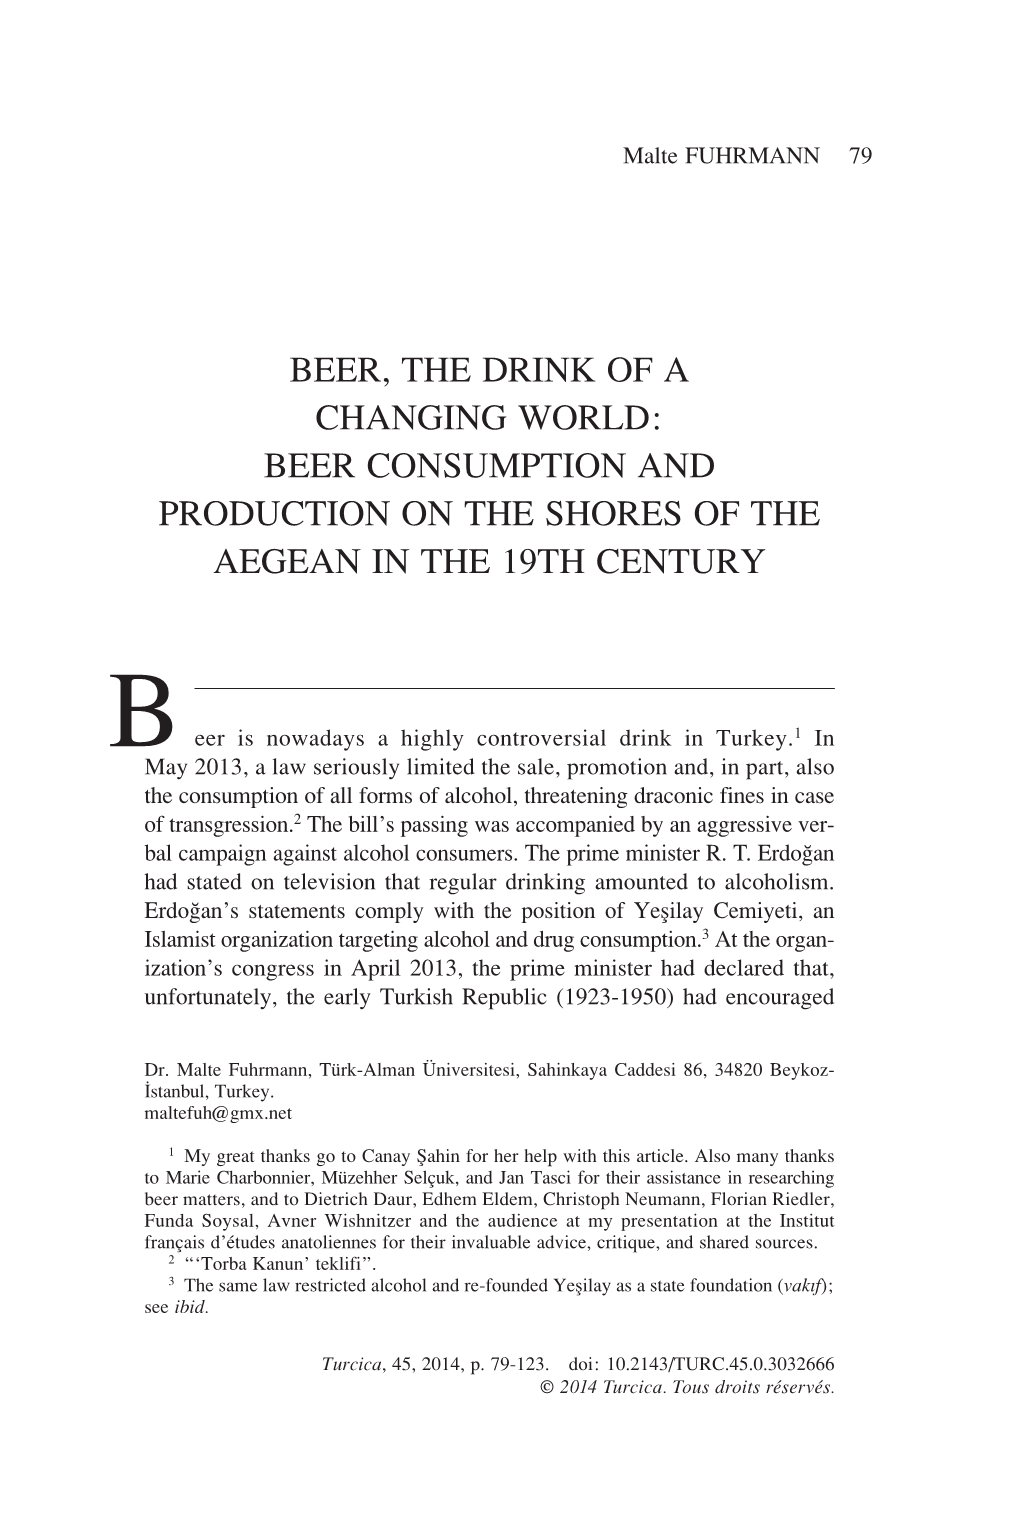 Beer, the Drink of a Changing World: Beer Consumption and Production on the Shores of the Aegean in the 19Th Century